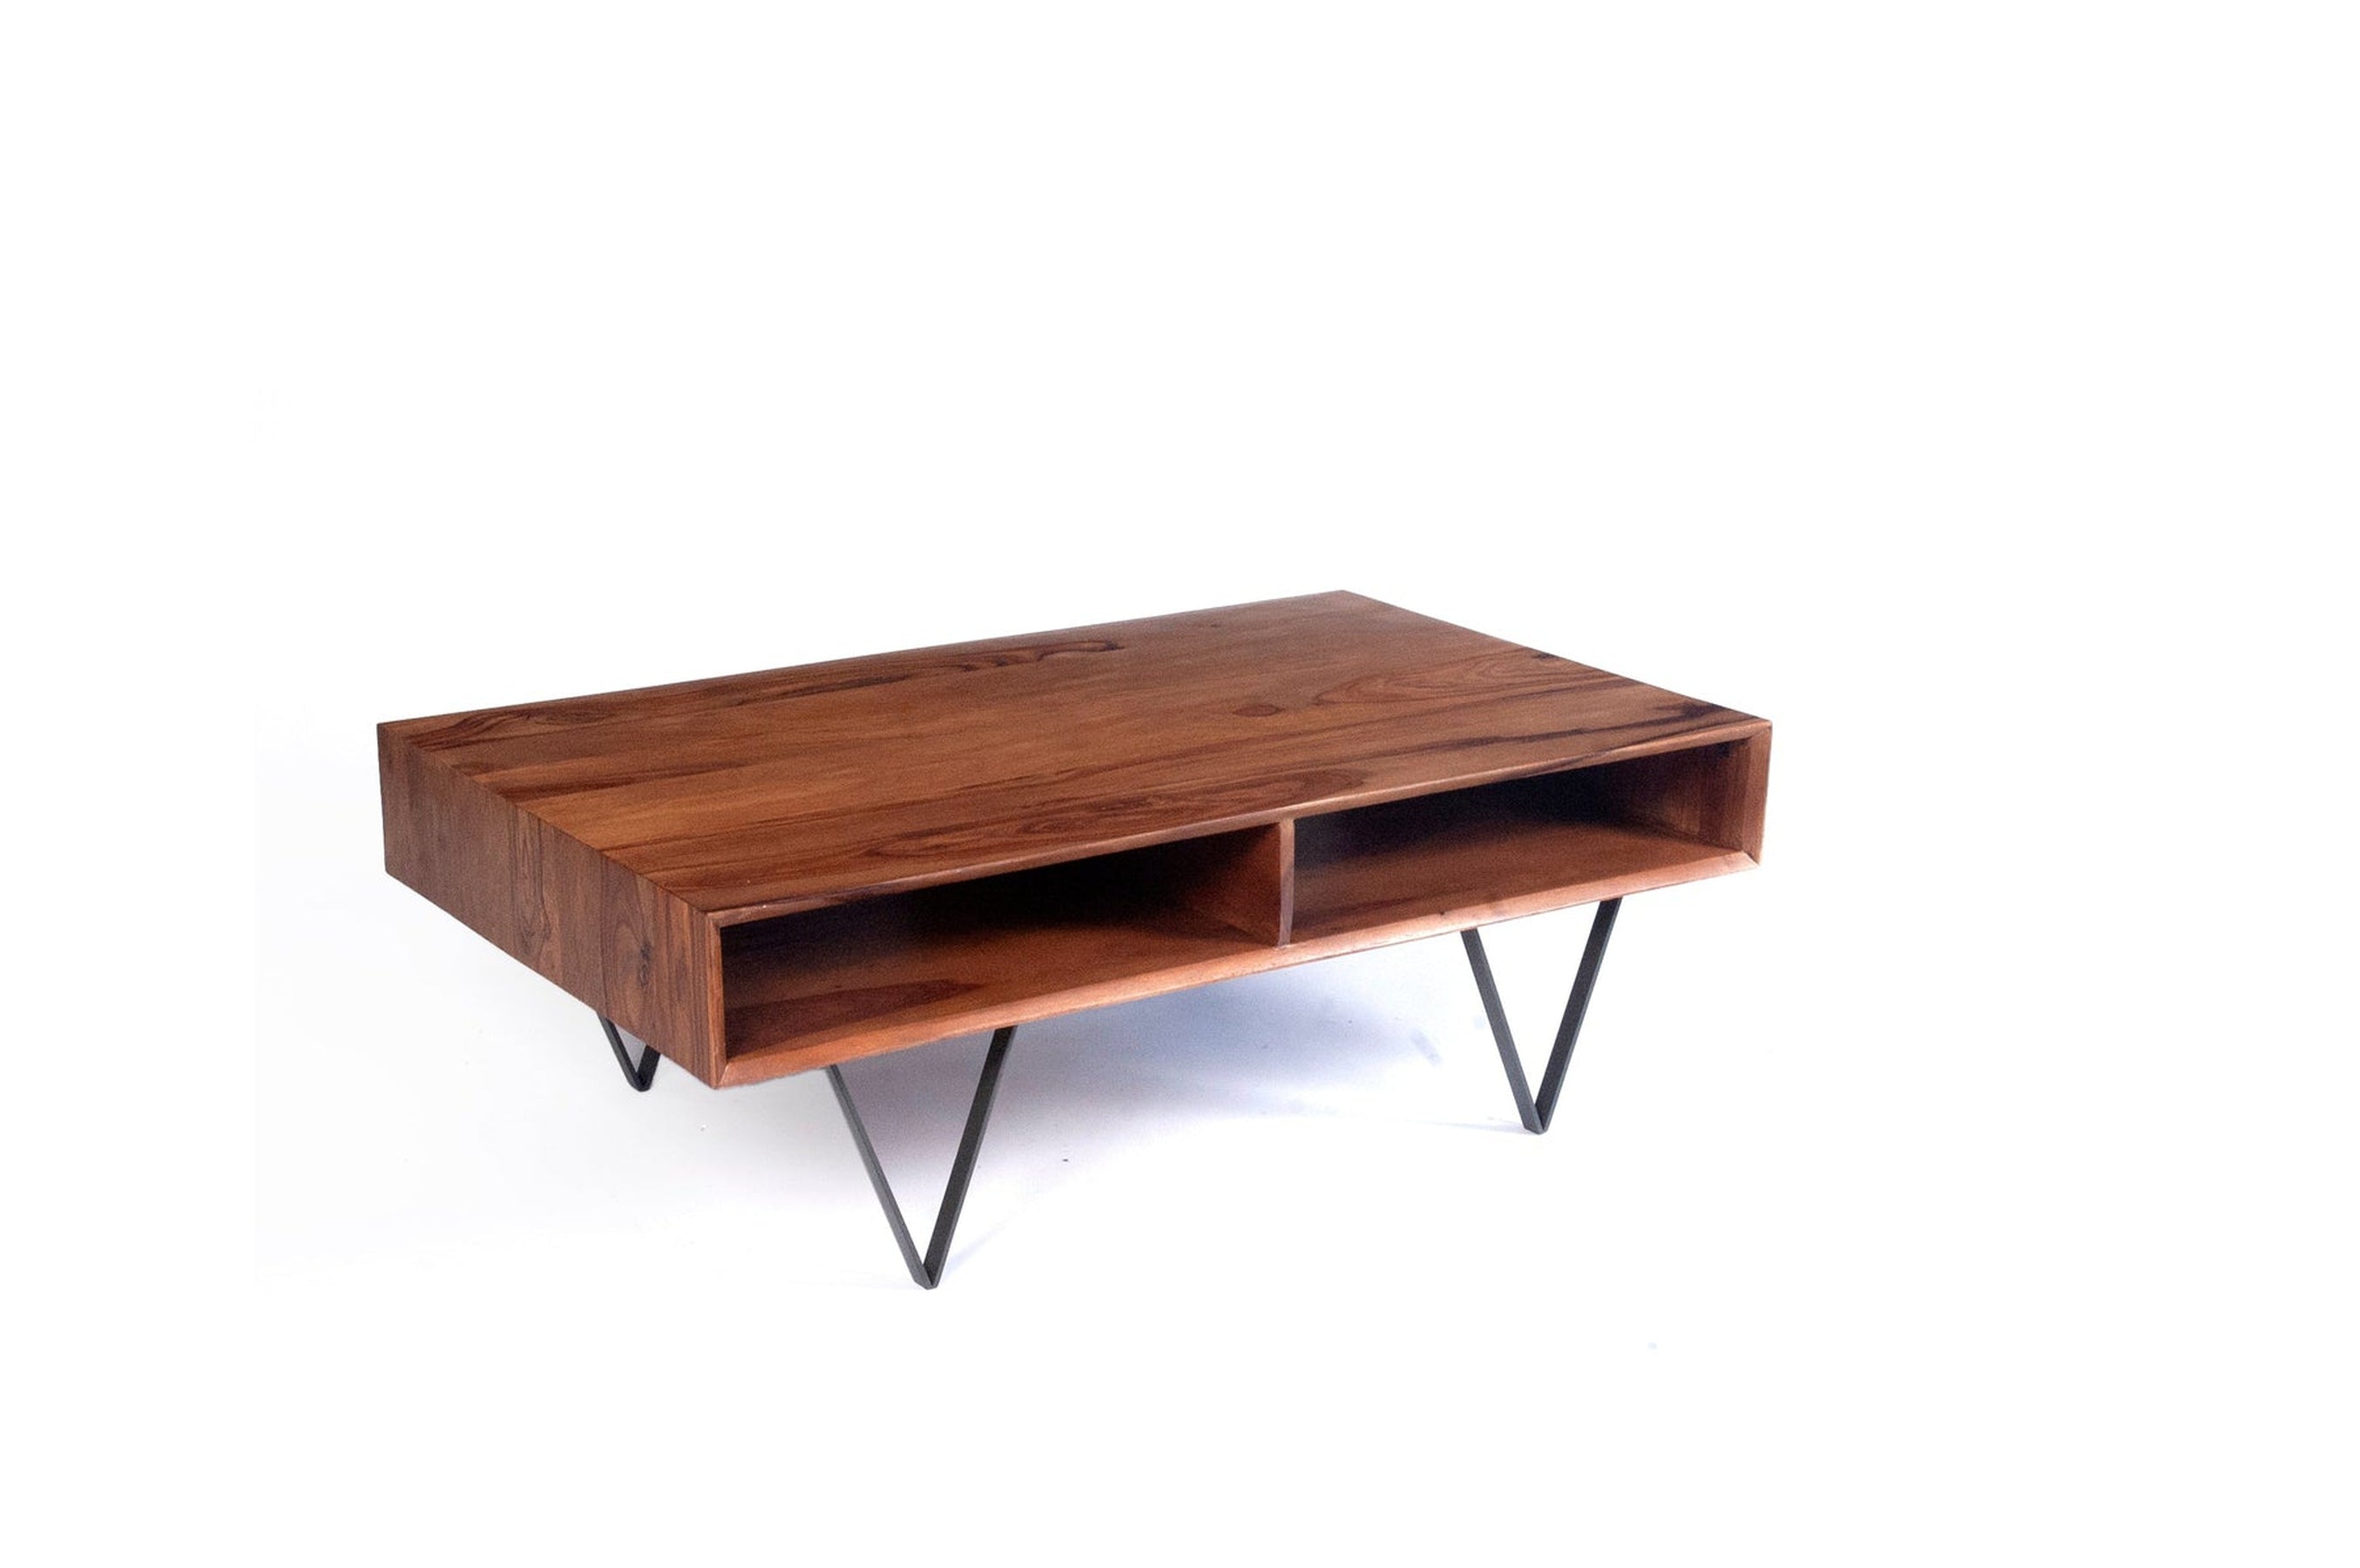 Casa Suarez Metric Coffee Table | Wide Industrial Contemporary Wood Coffee Table | Open Shelf Wooden Coffee Table for Living Room | 45x28x16 inches